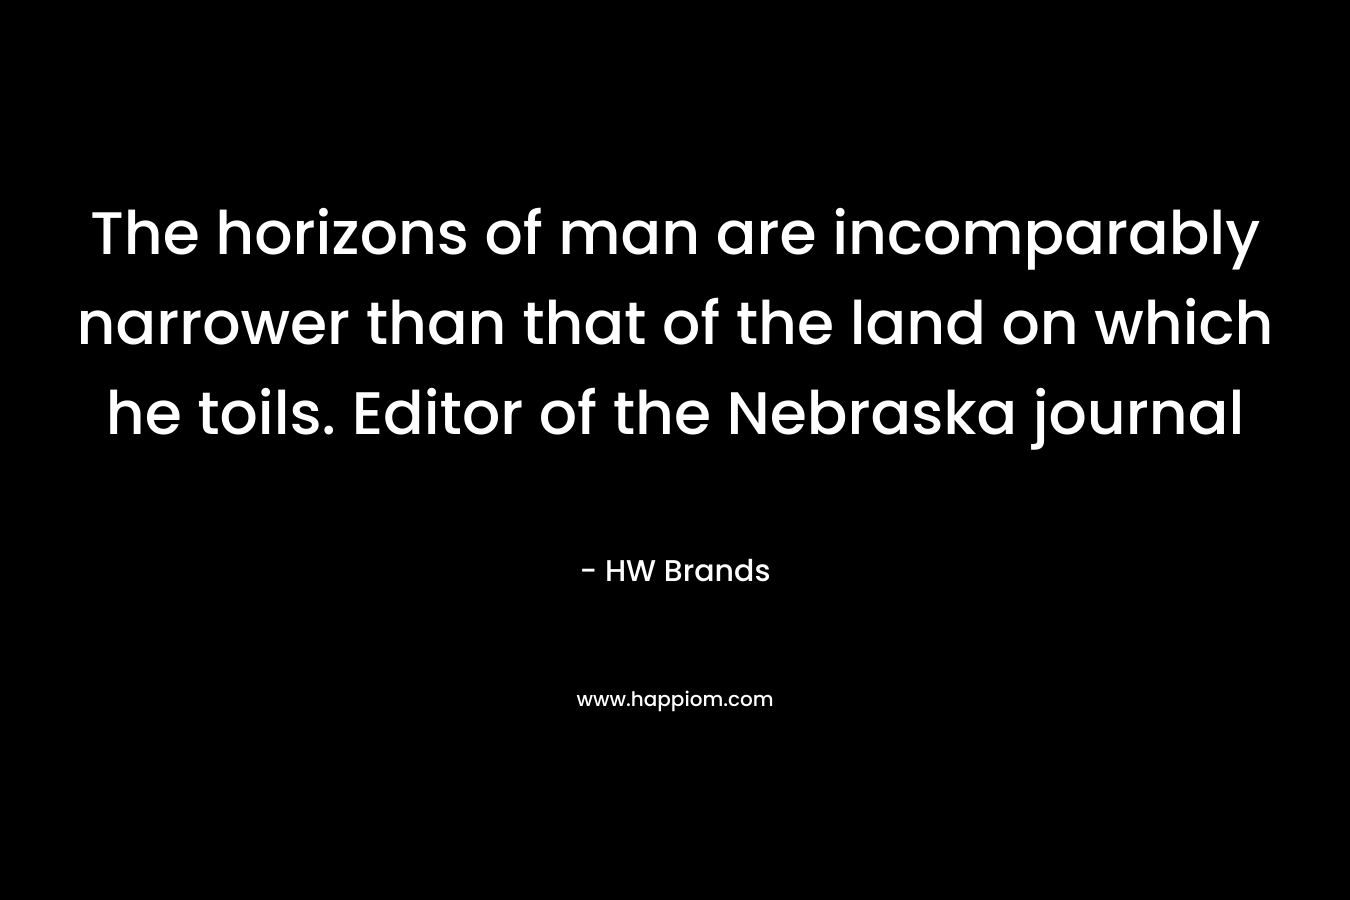 The horizons of man are incomparably narrower than that of the land on which he toils. Editor of the Nebraska journal – HW Brands